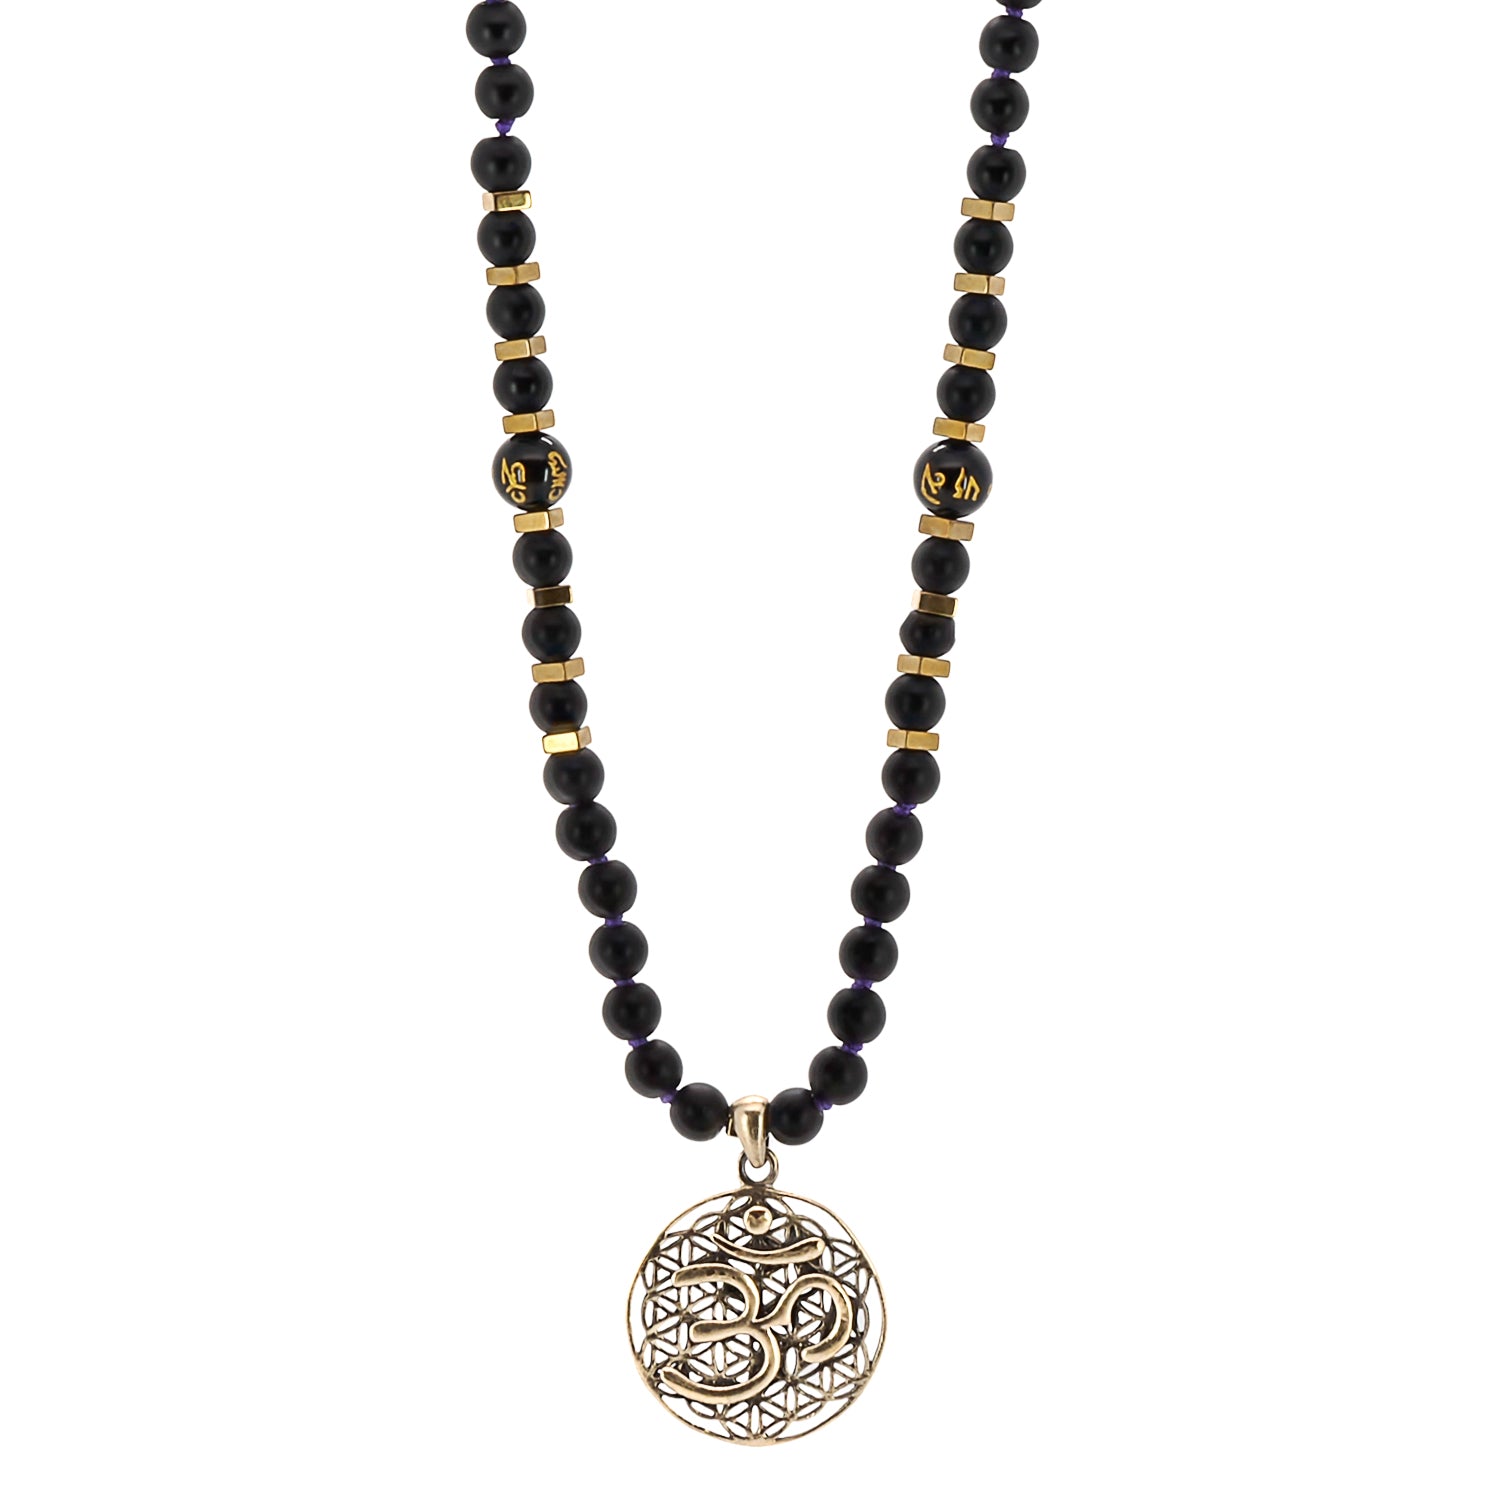 A detailed view of the meditation seed beads on the Spiritual Yoga Mala Onyx Necklace